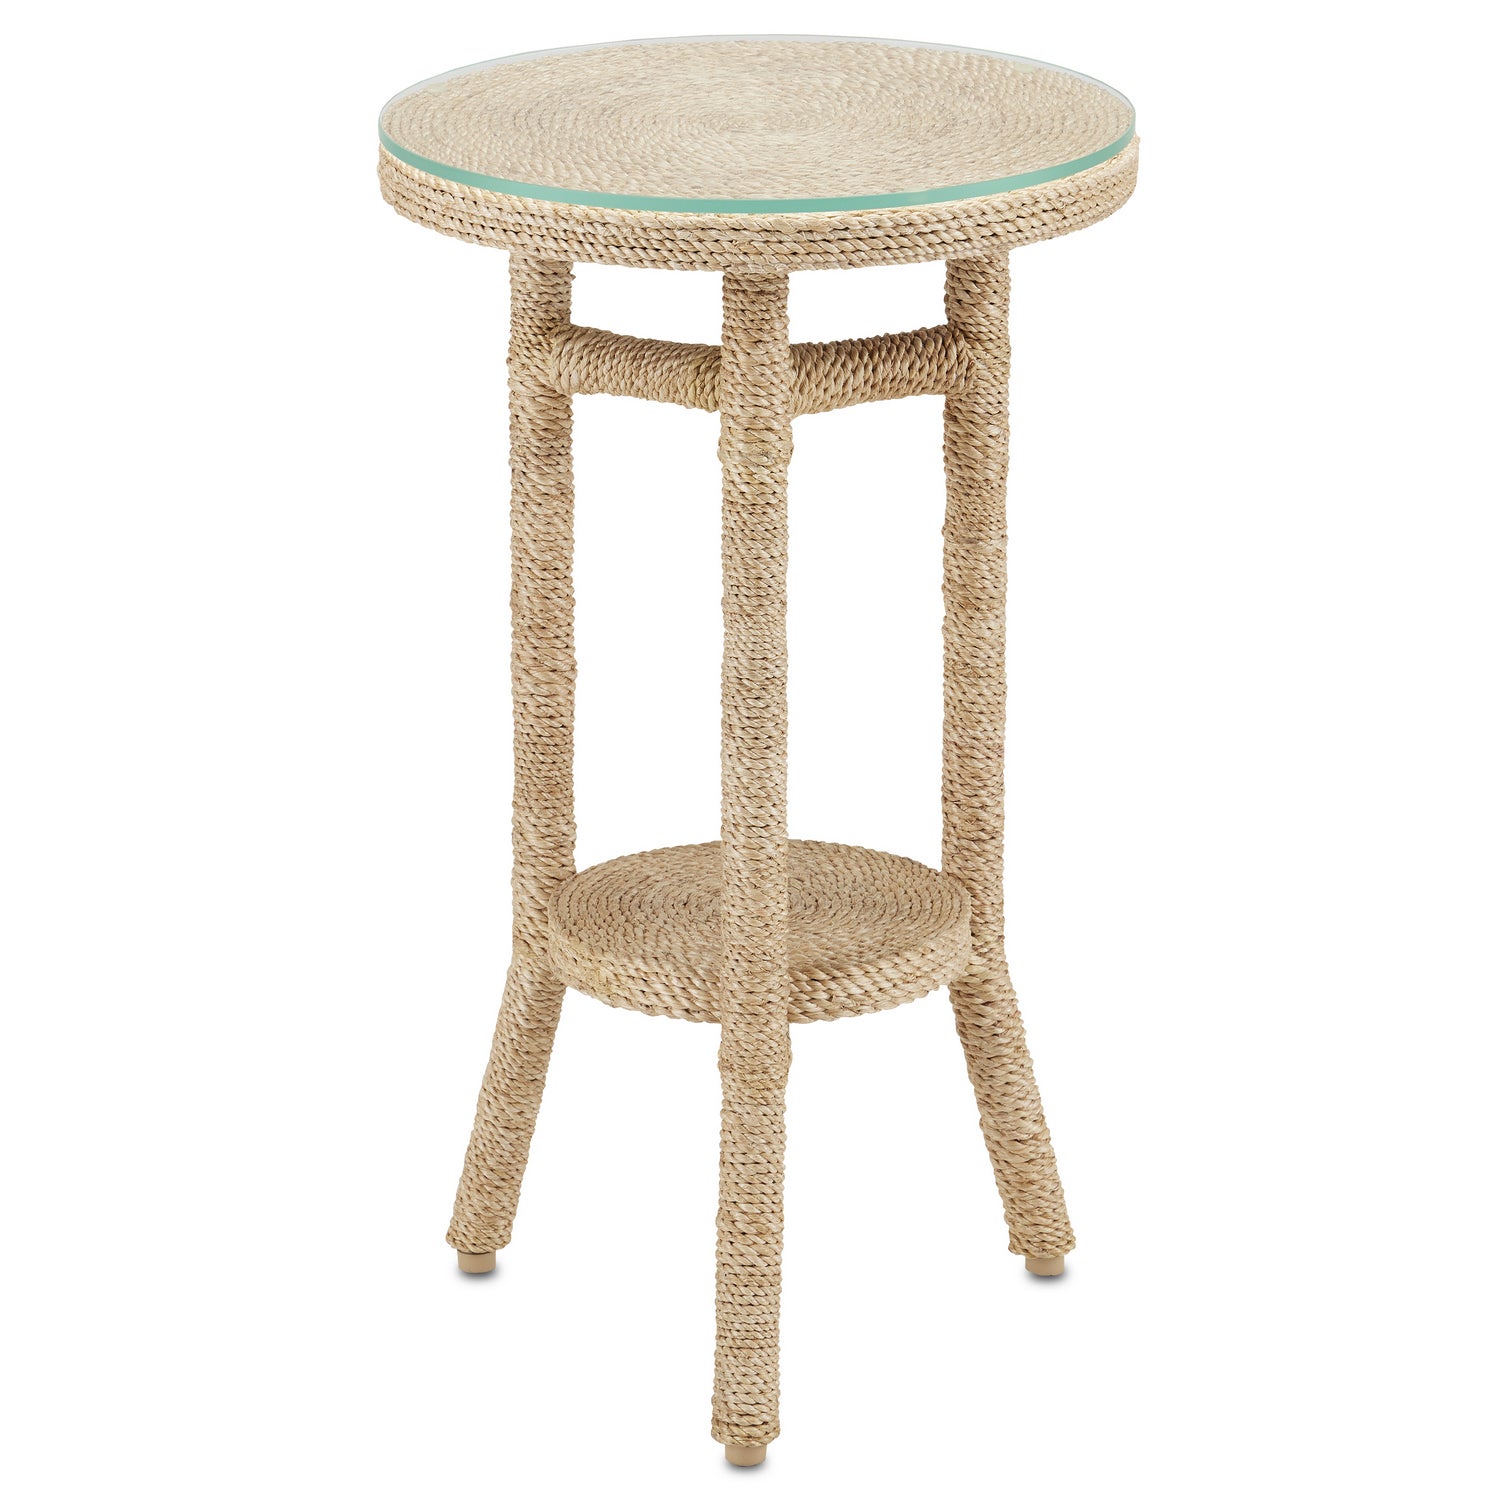 Drinks Table from the Limay collection in Natural Rope/Clear finish